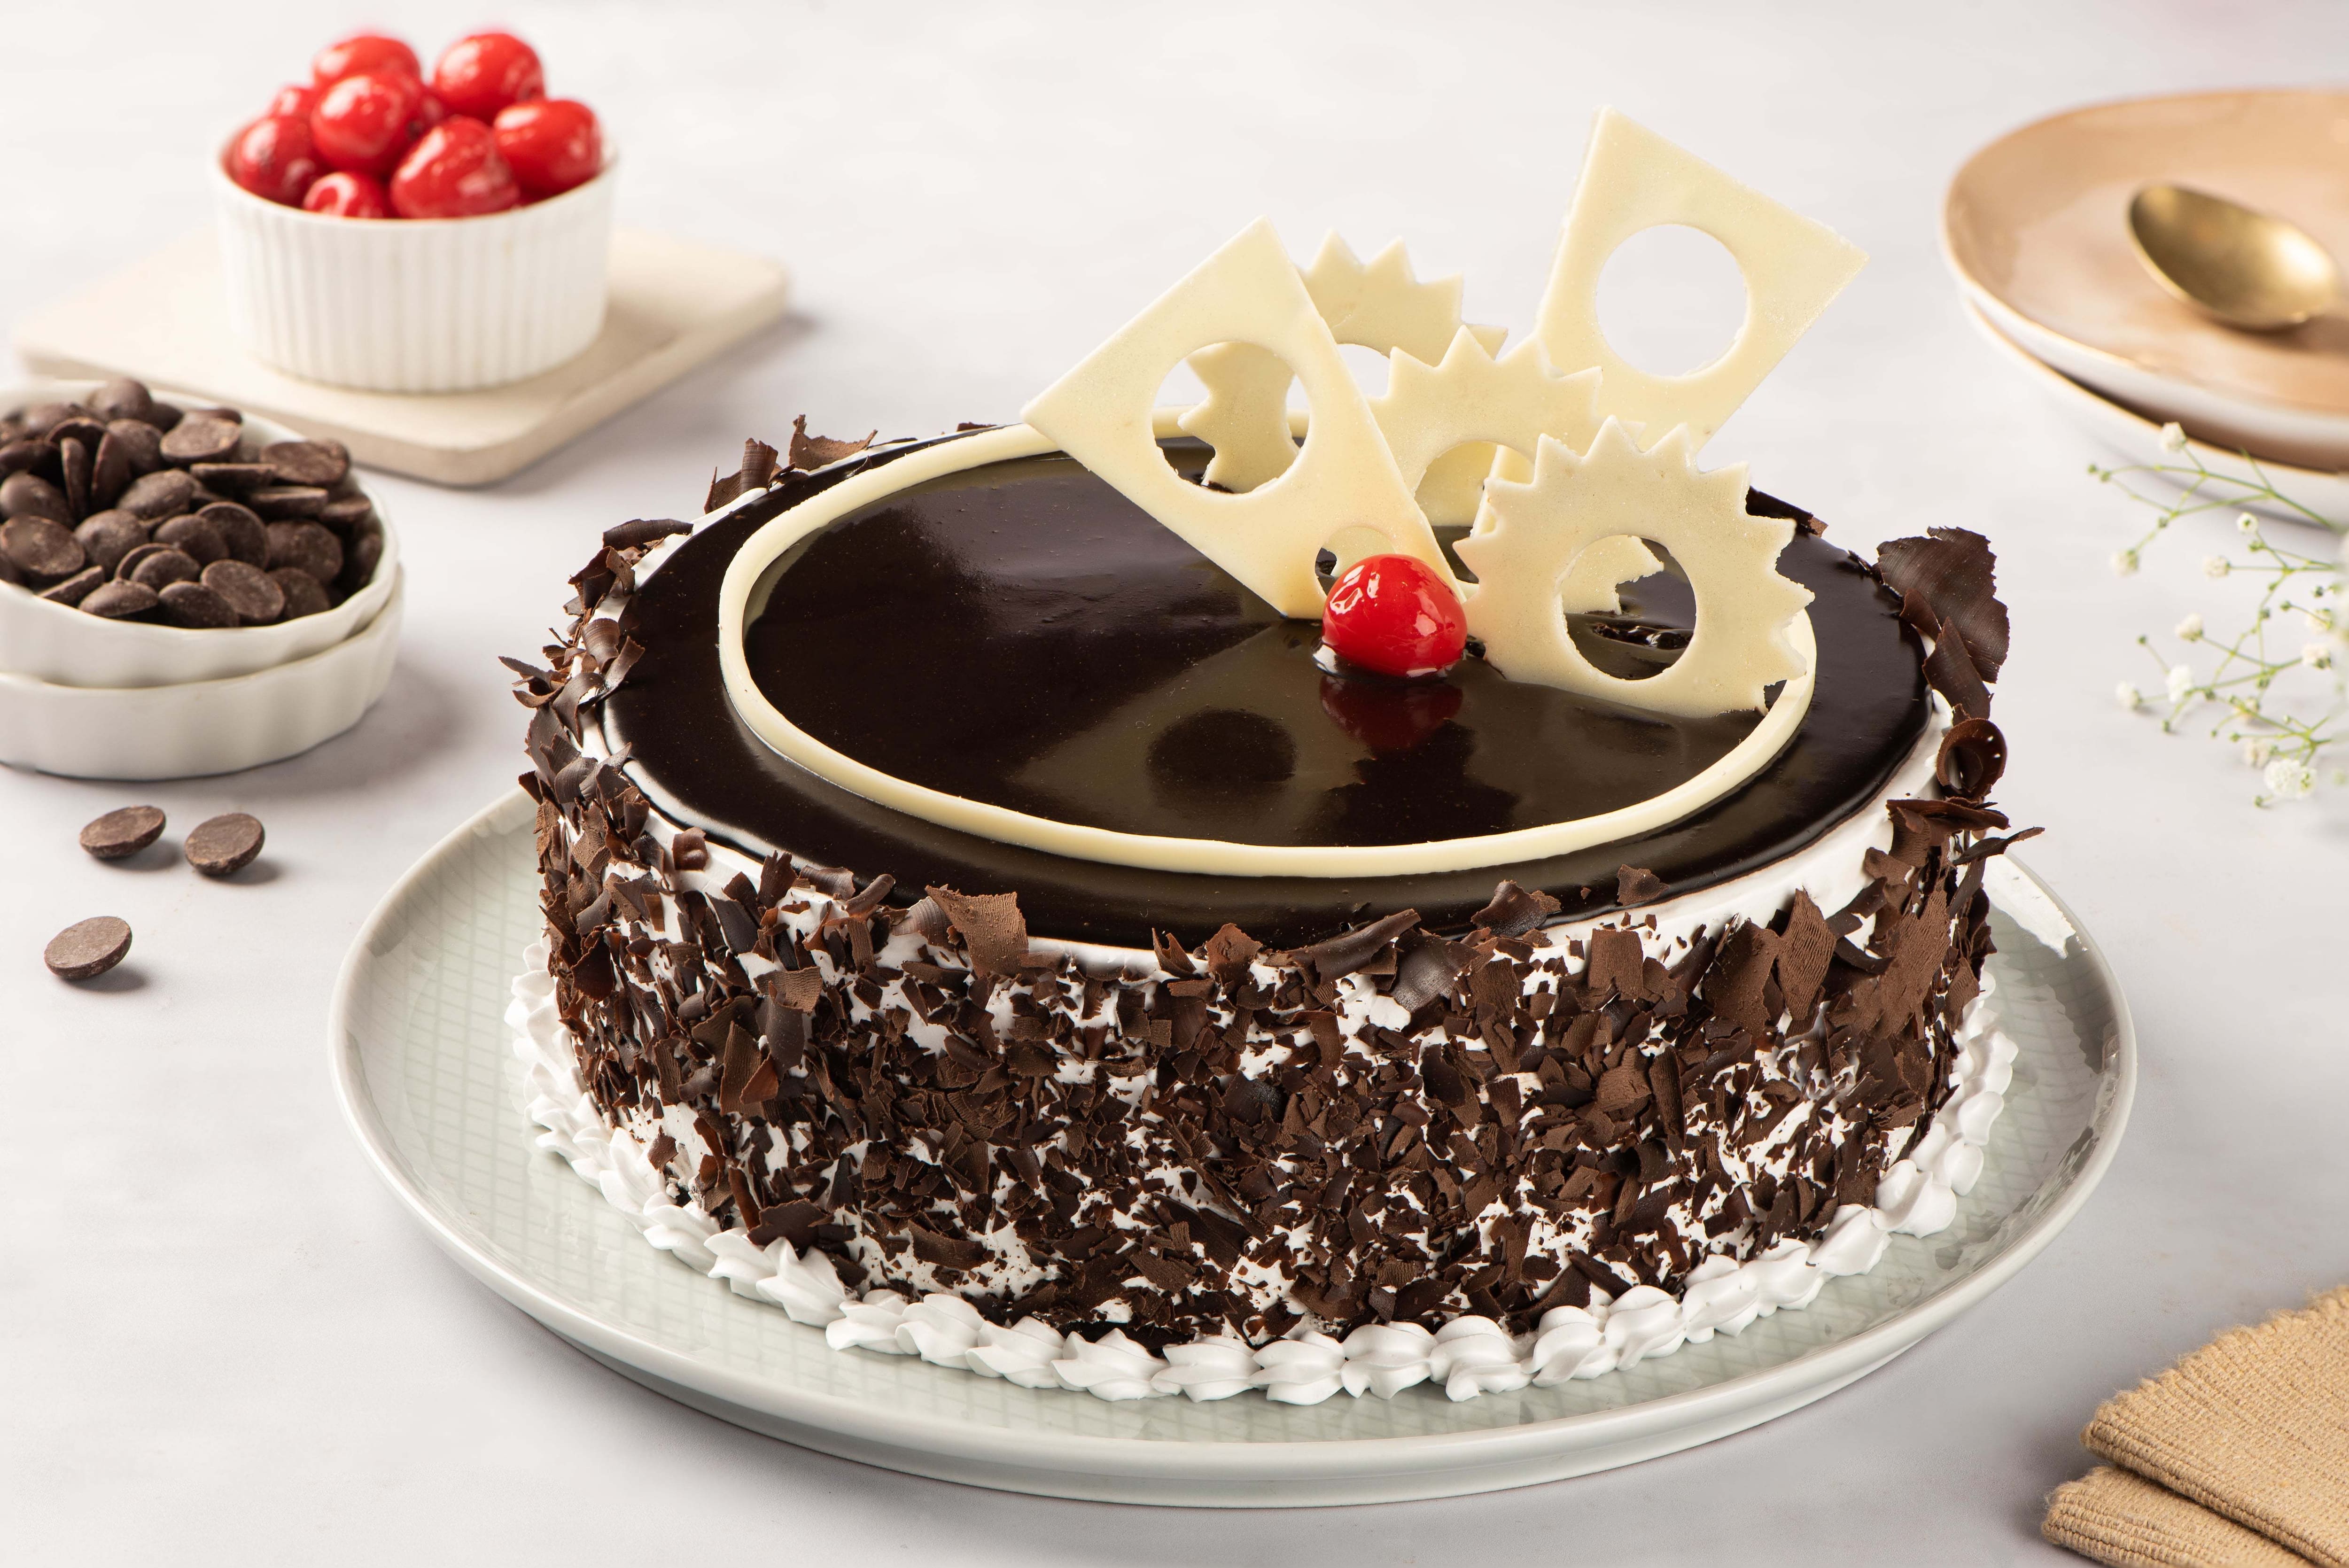 Send Mouth Watering Black Forest Cake from 3/4 Star Bakery to Kerala, India  - Page Details : keralaflowersgifts.com